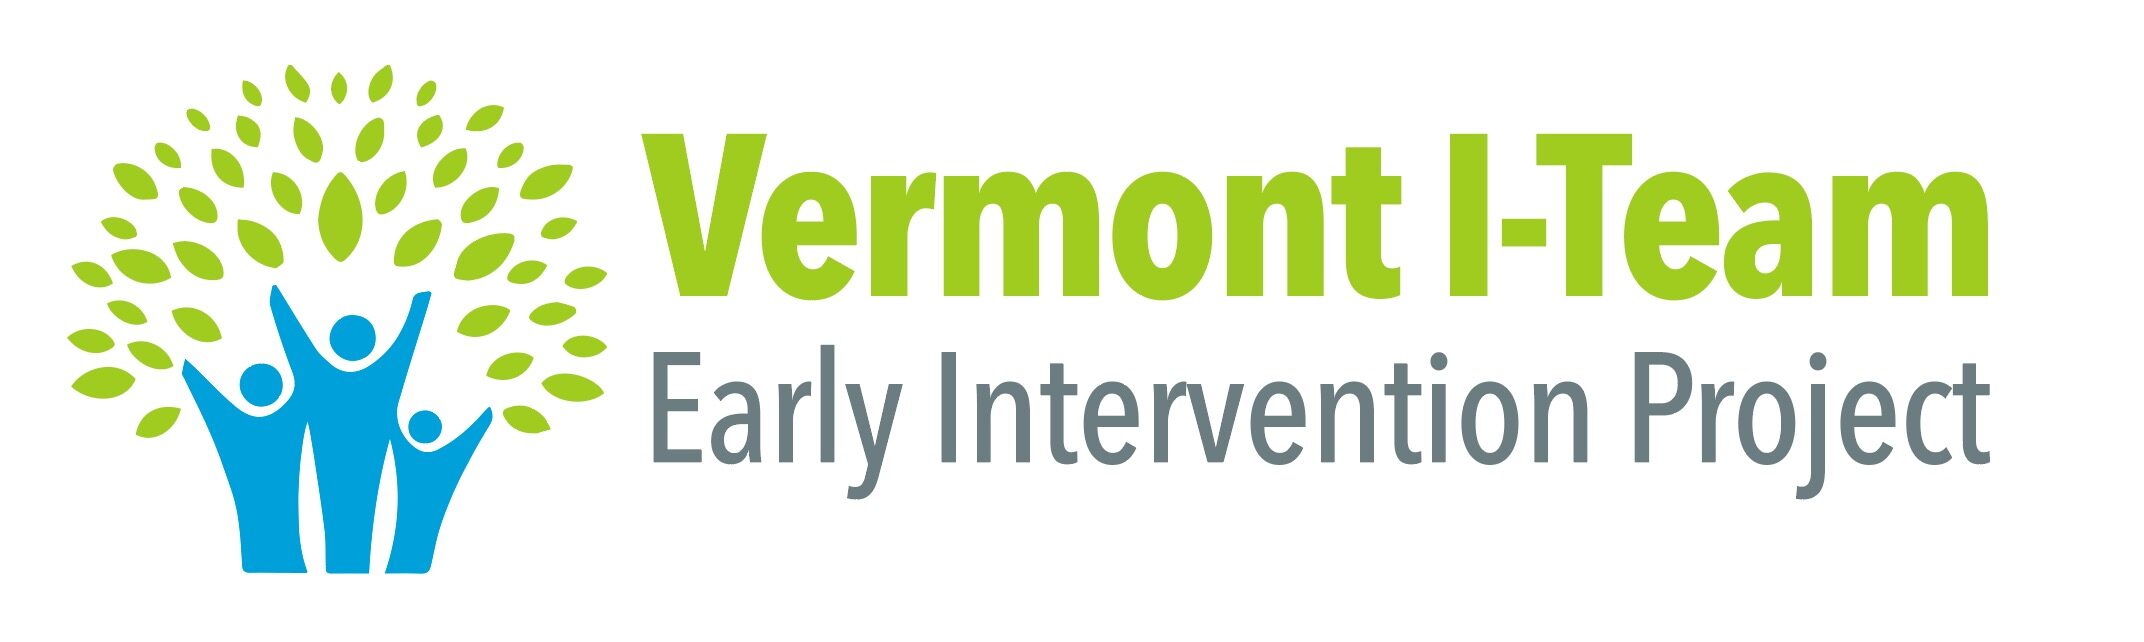 text: Vermont I-Team Early Intervention Project